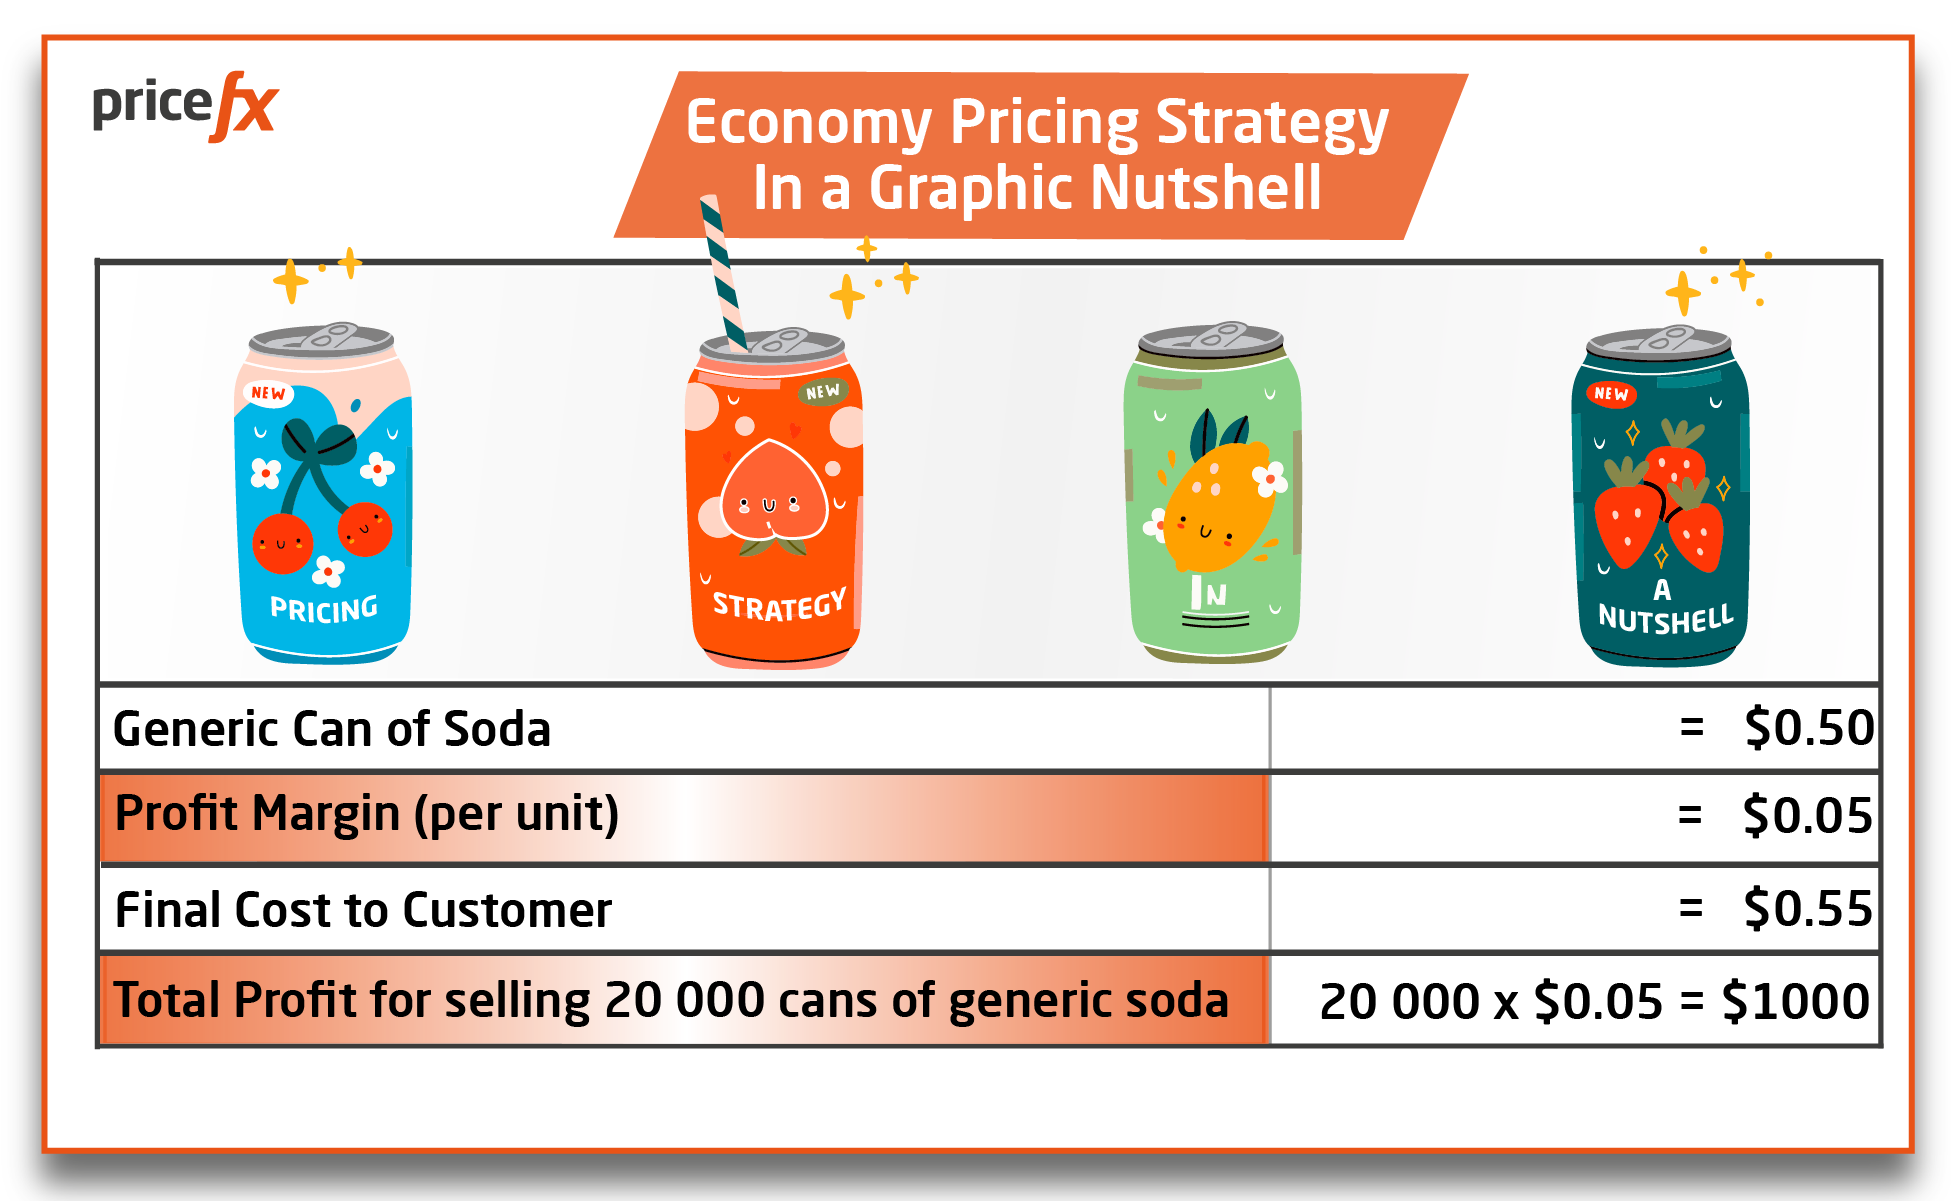 Economy-Pricing-Strategy-In-a-Graphic-Nutshell